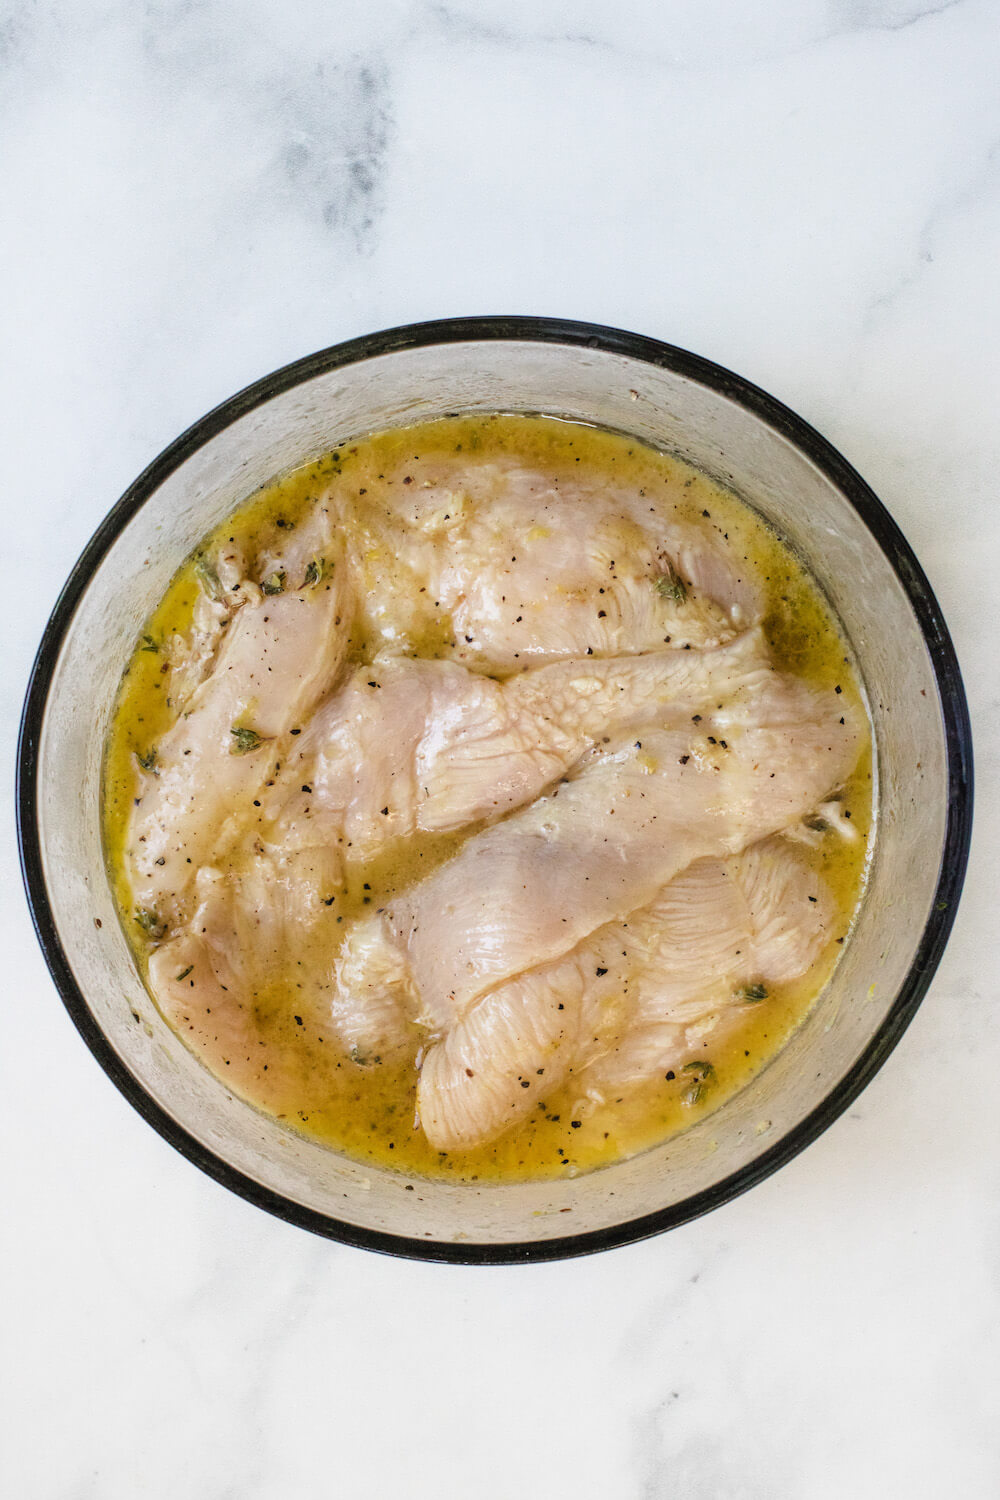 Chicken pieces in the lemon marinade in a bowl.